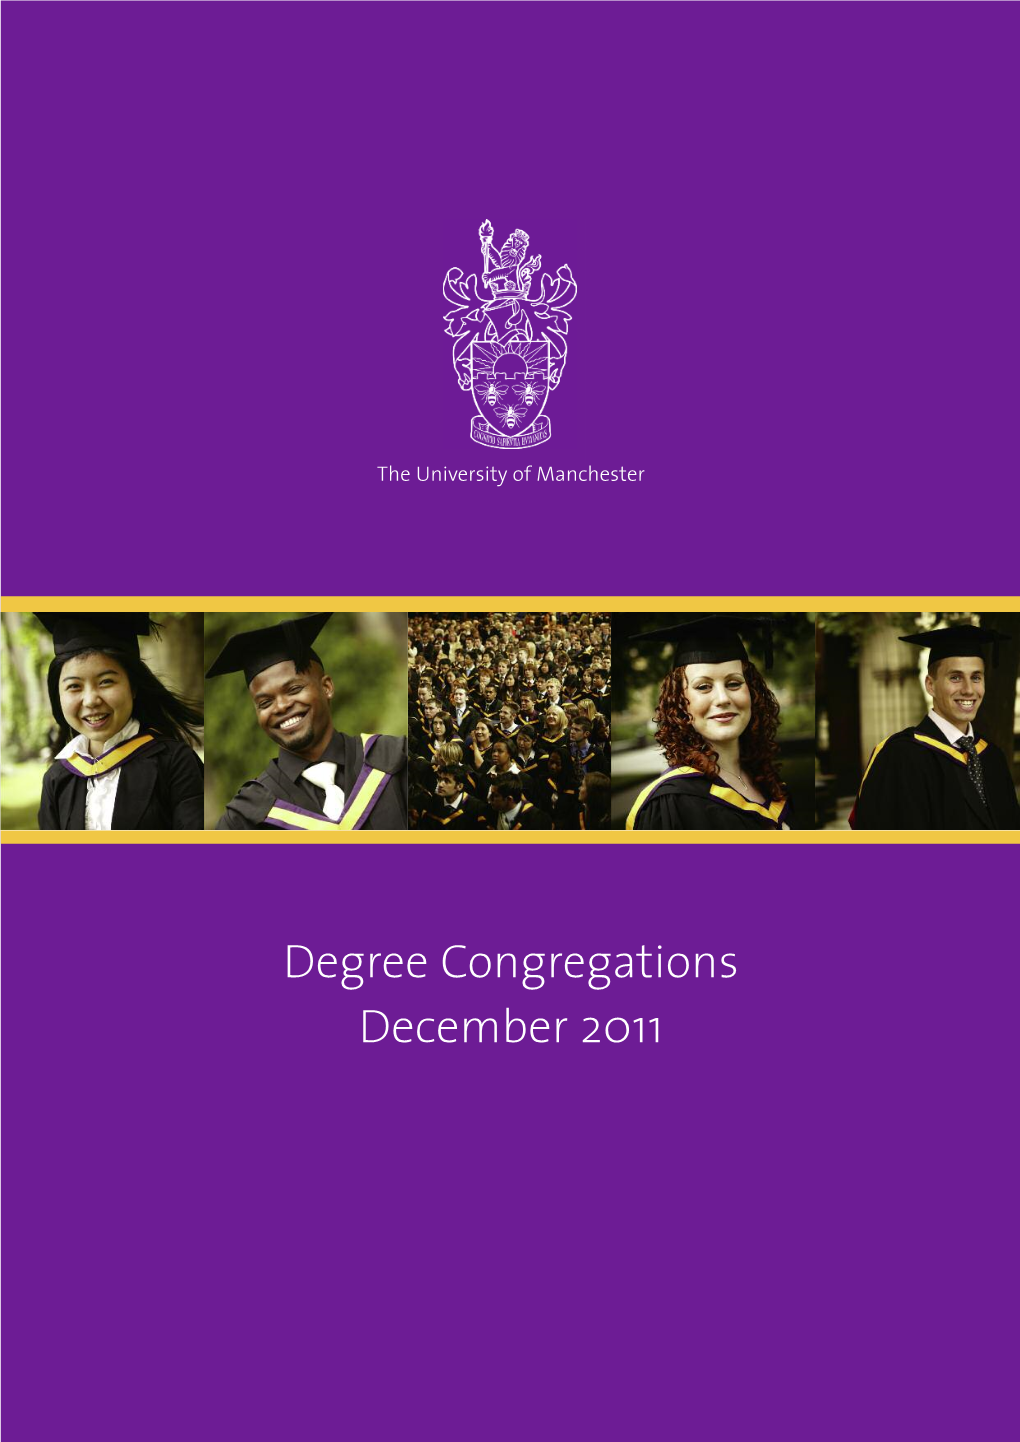 Degree Congregations December 2011 the Inauguration of the University of Manchester